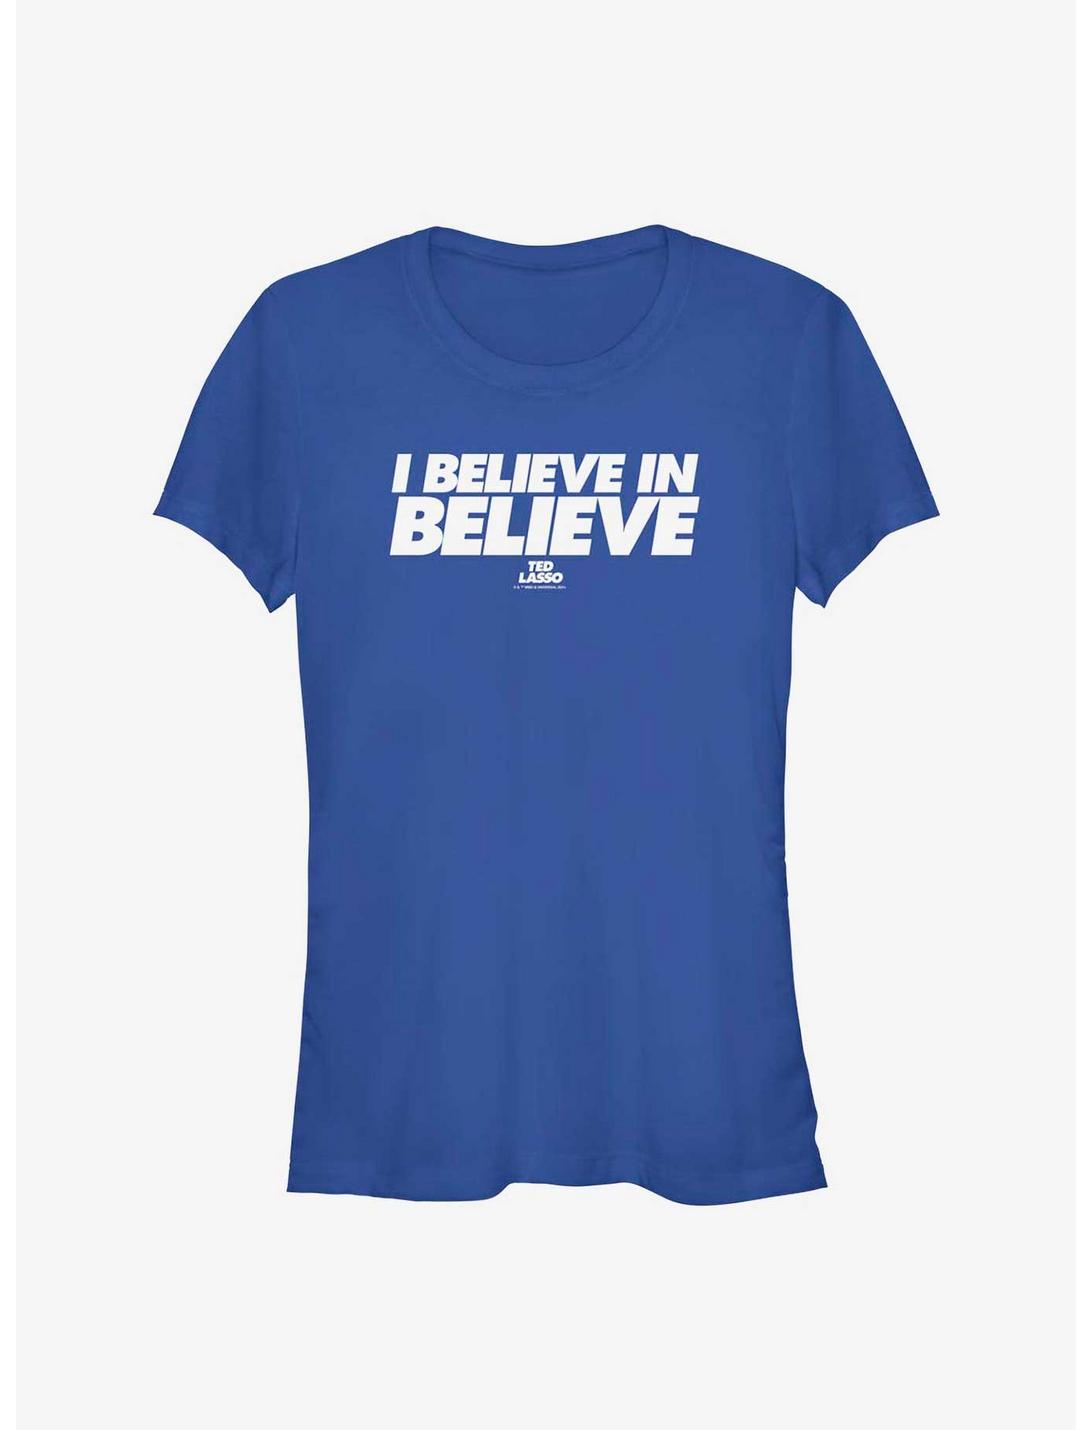 Ted Lasso Believe In Believe Text Girls T-Shirt, ROYAL, hi-res